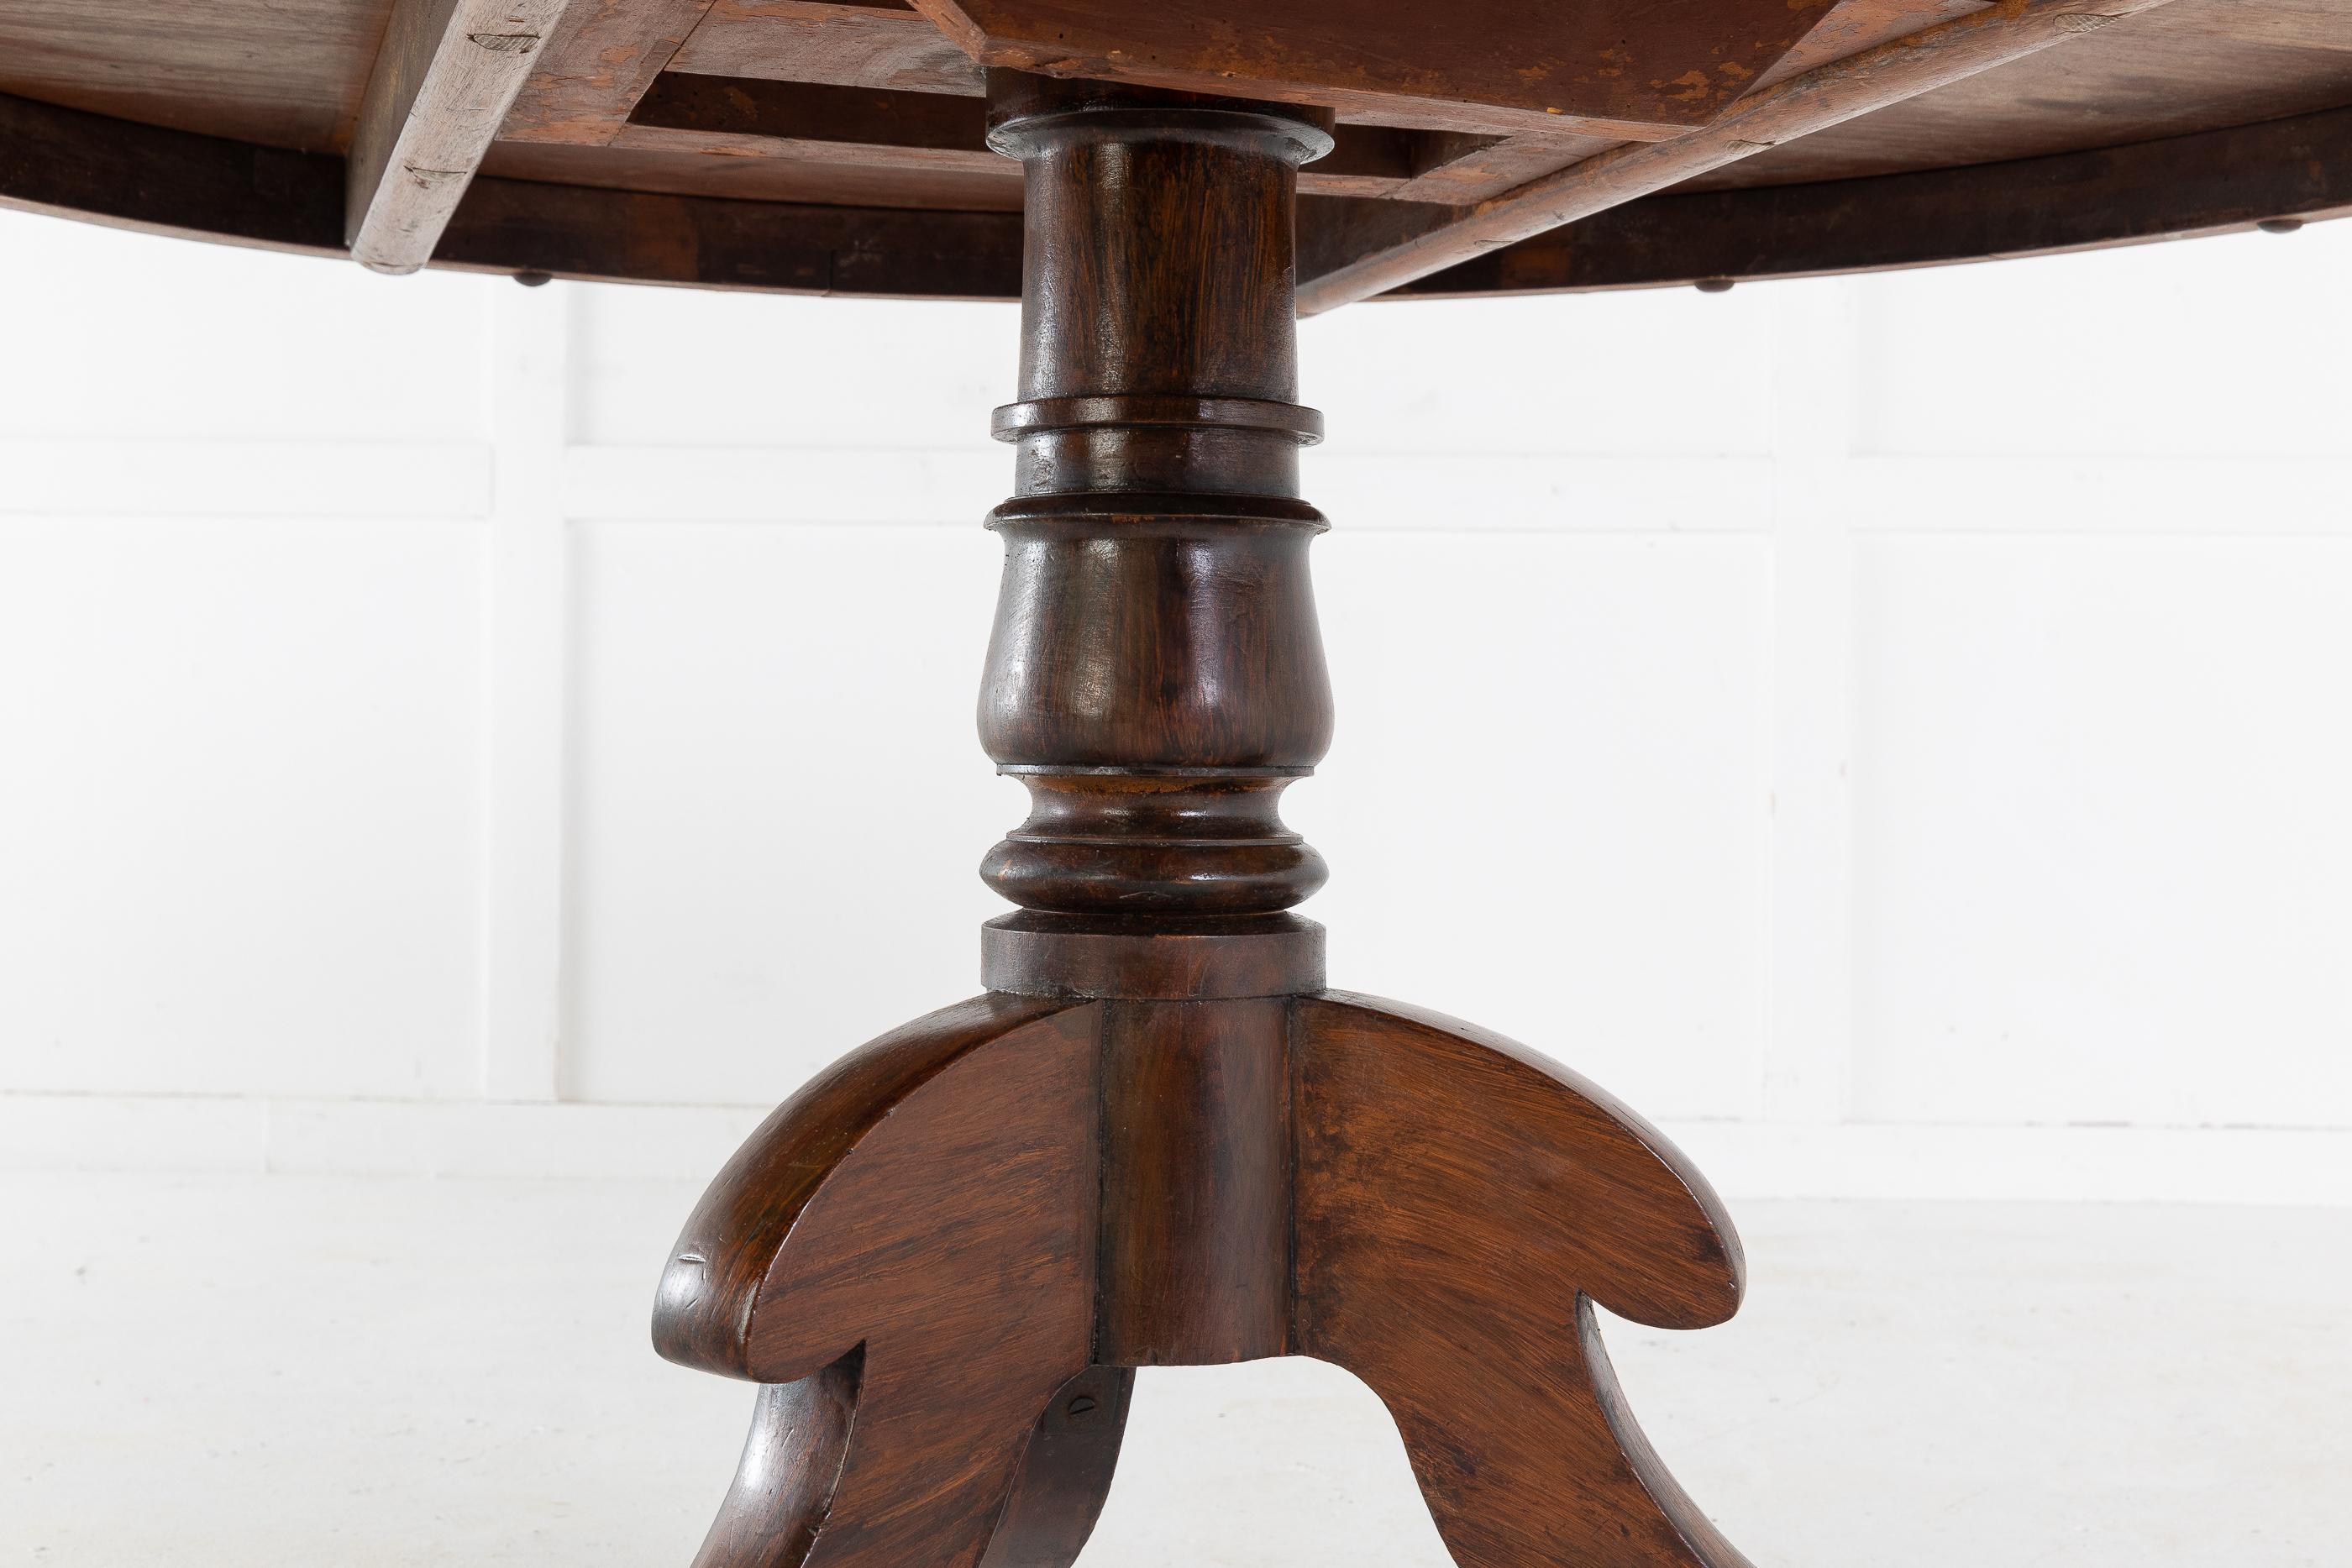 English Regency 19th century rosewood circular centre table. The top having a border of crossbanding, above the shallow inset frieze. Supported on a turned, simulated rosewood, pedestal base terminating in three outswept legs with brass castors.